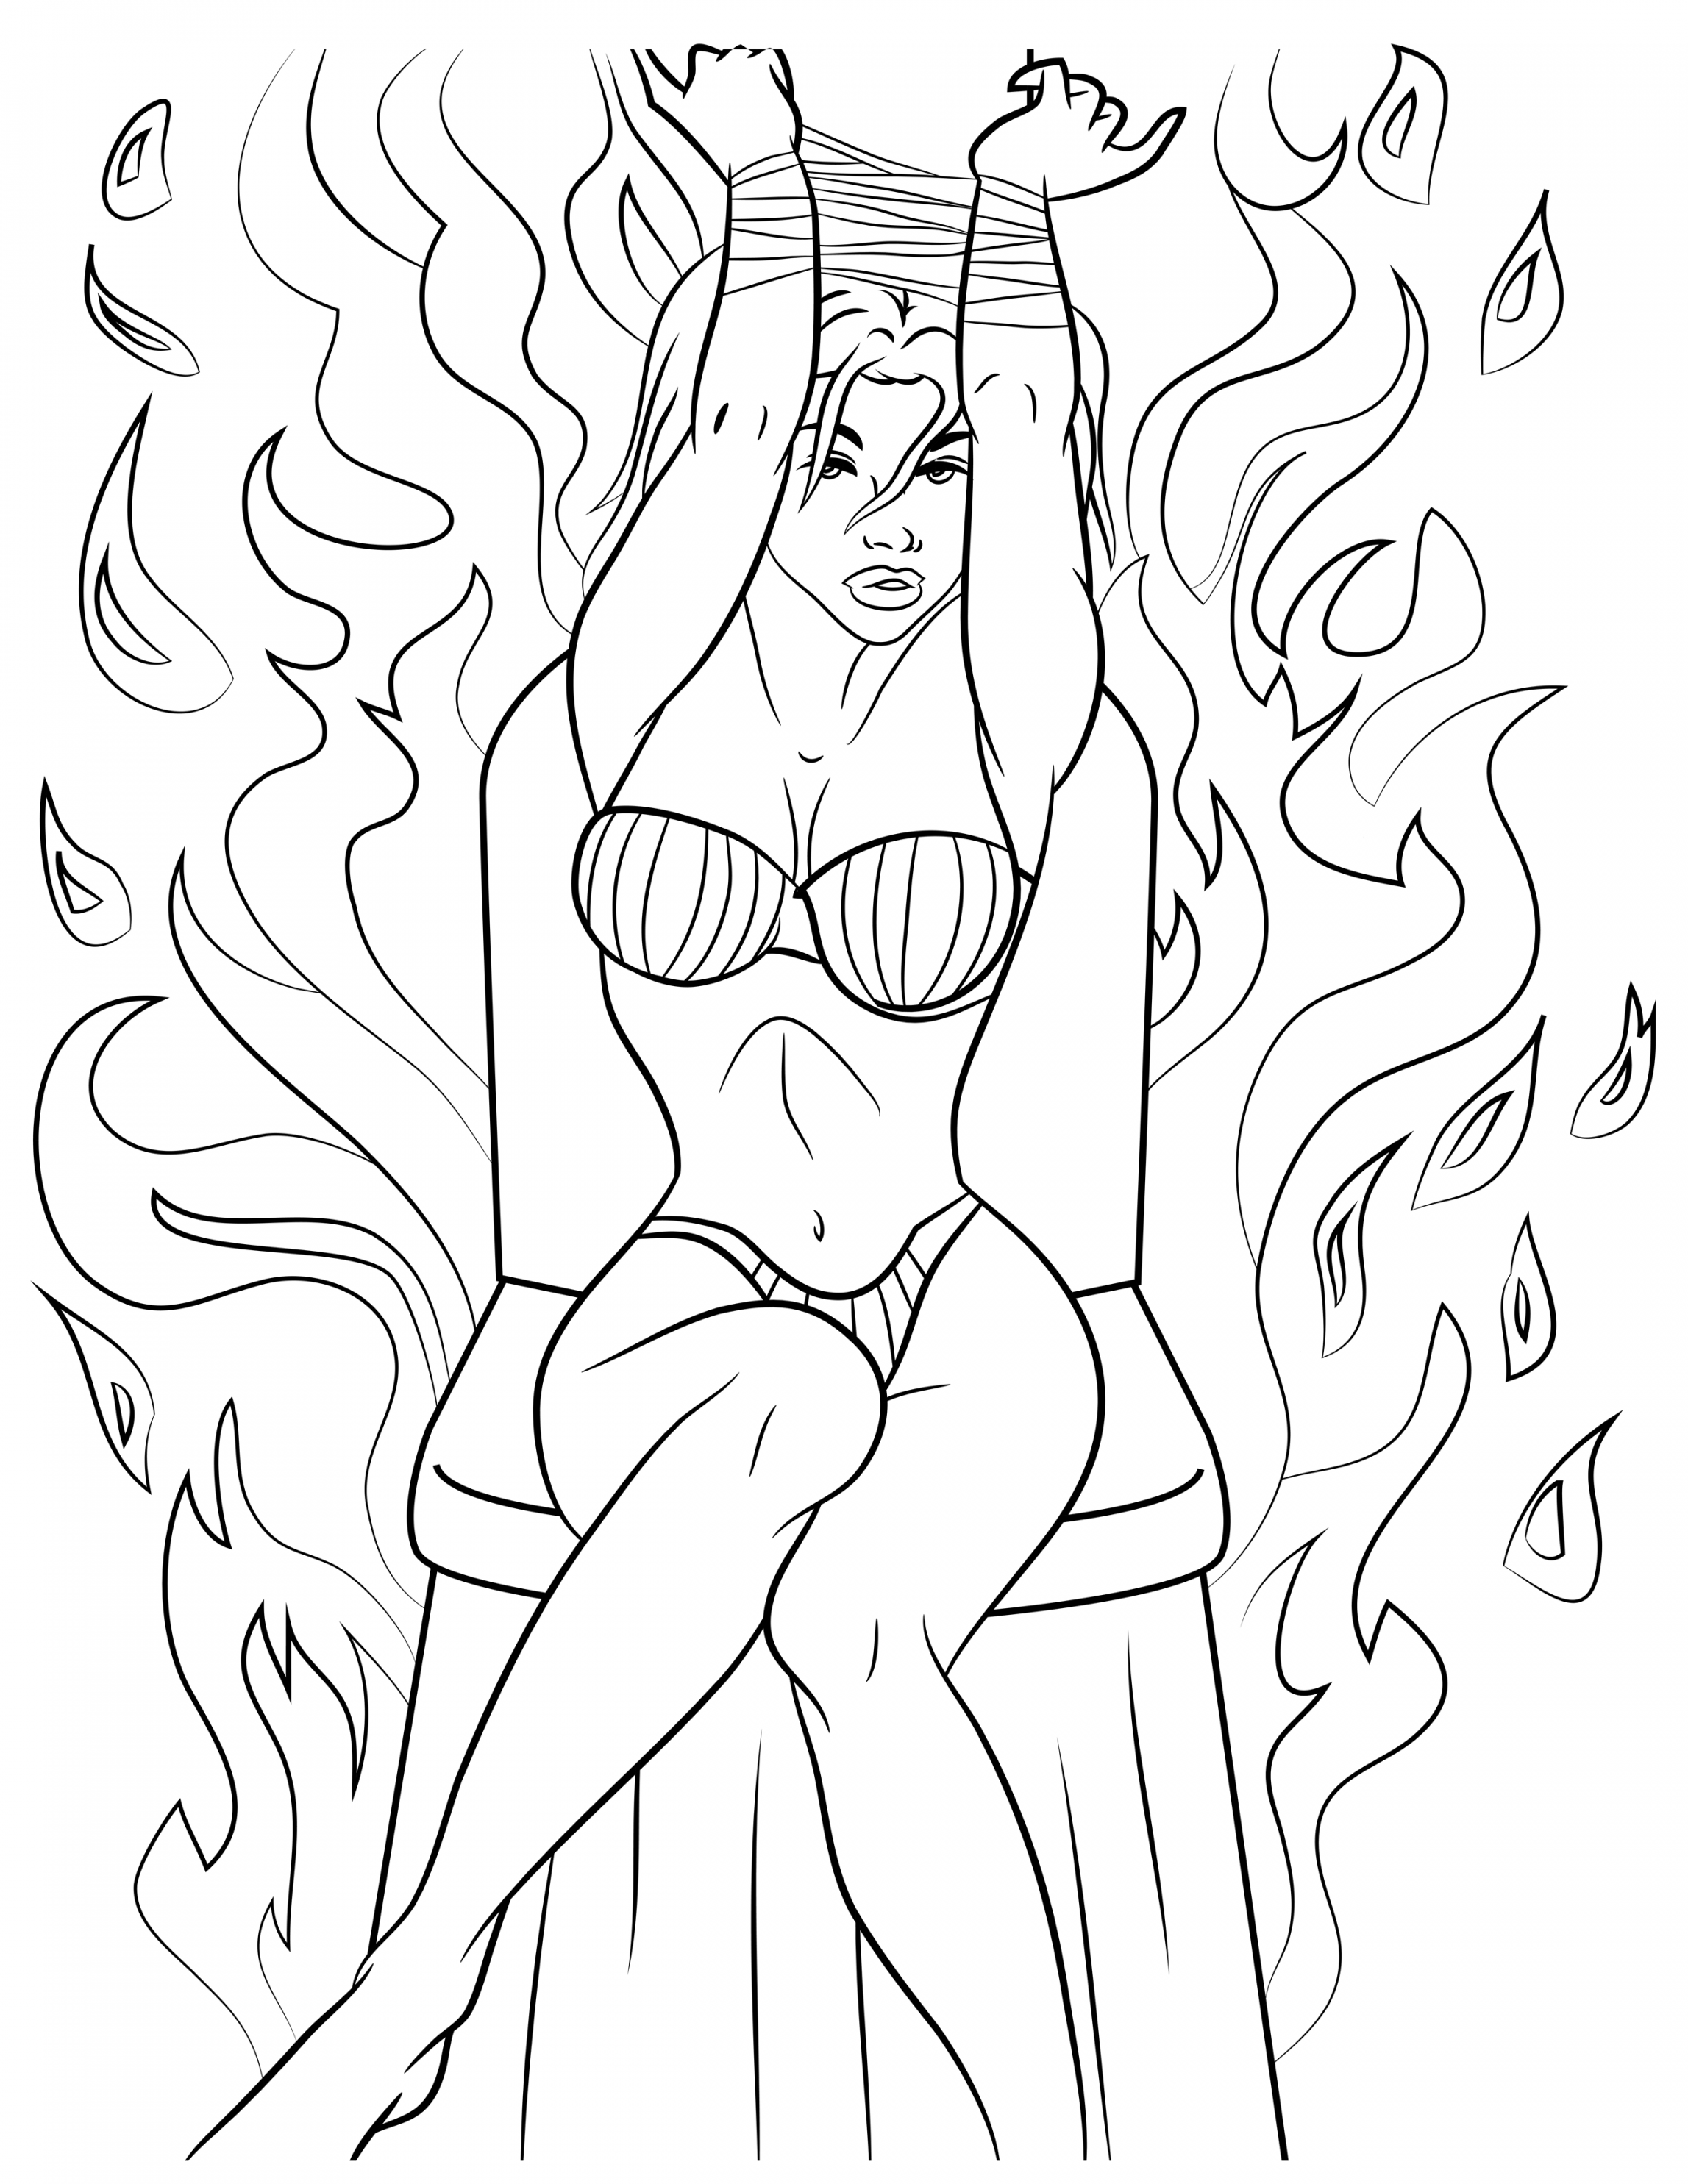 Pin on FREE Coloring Pages for Adults - FREE Printables - Free Printable Kinky Coloring Pages Free